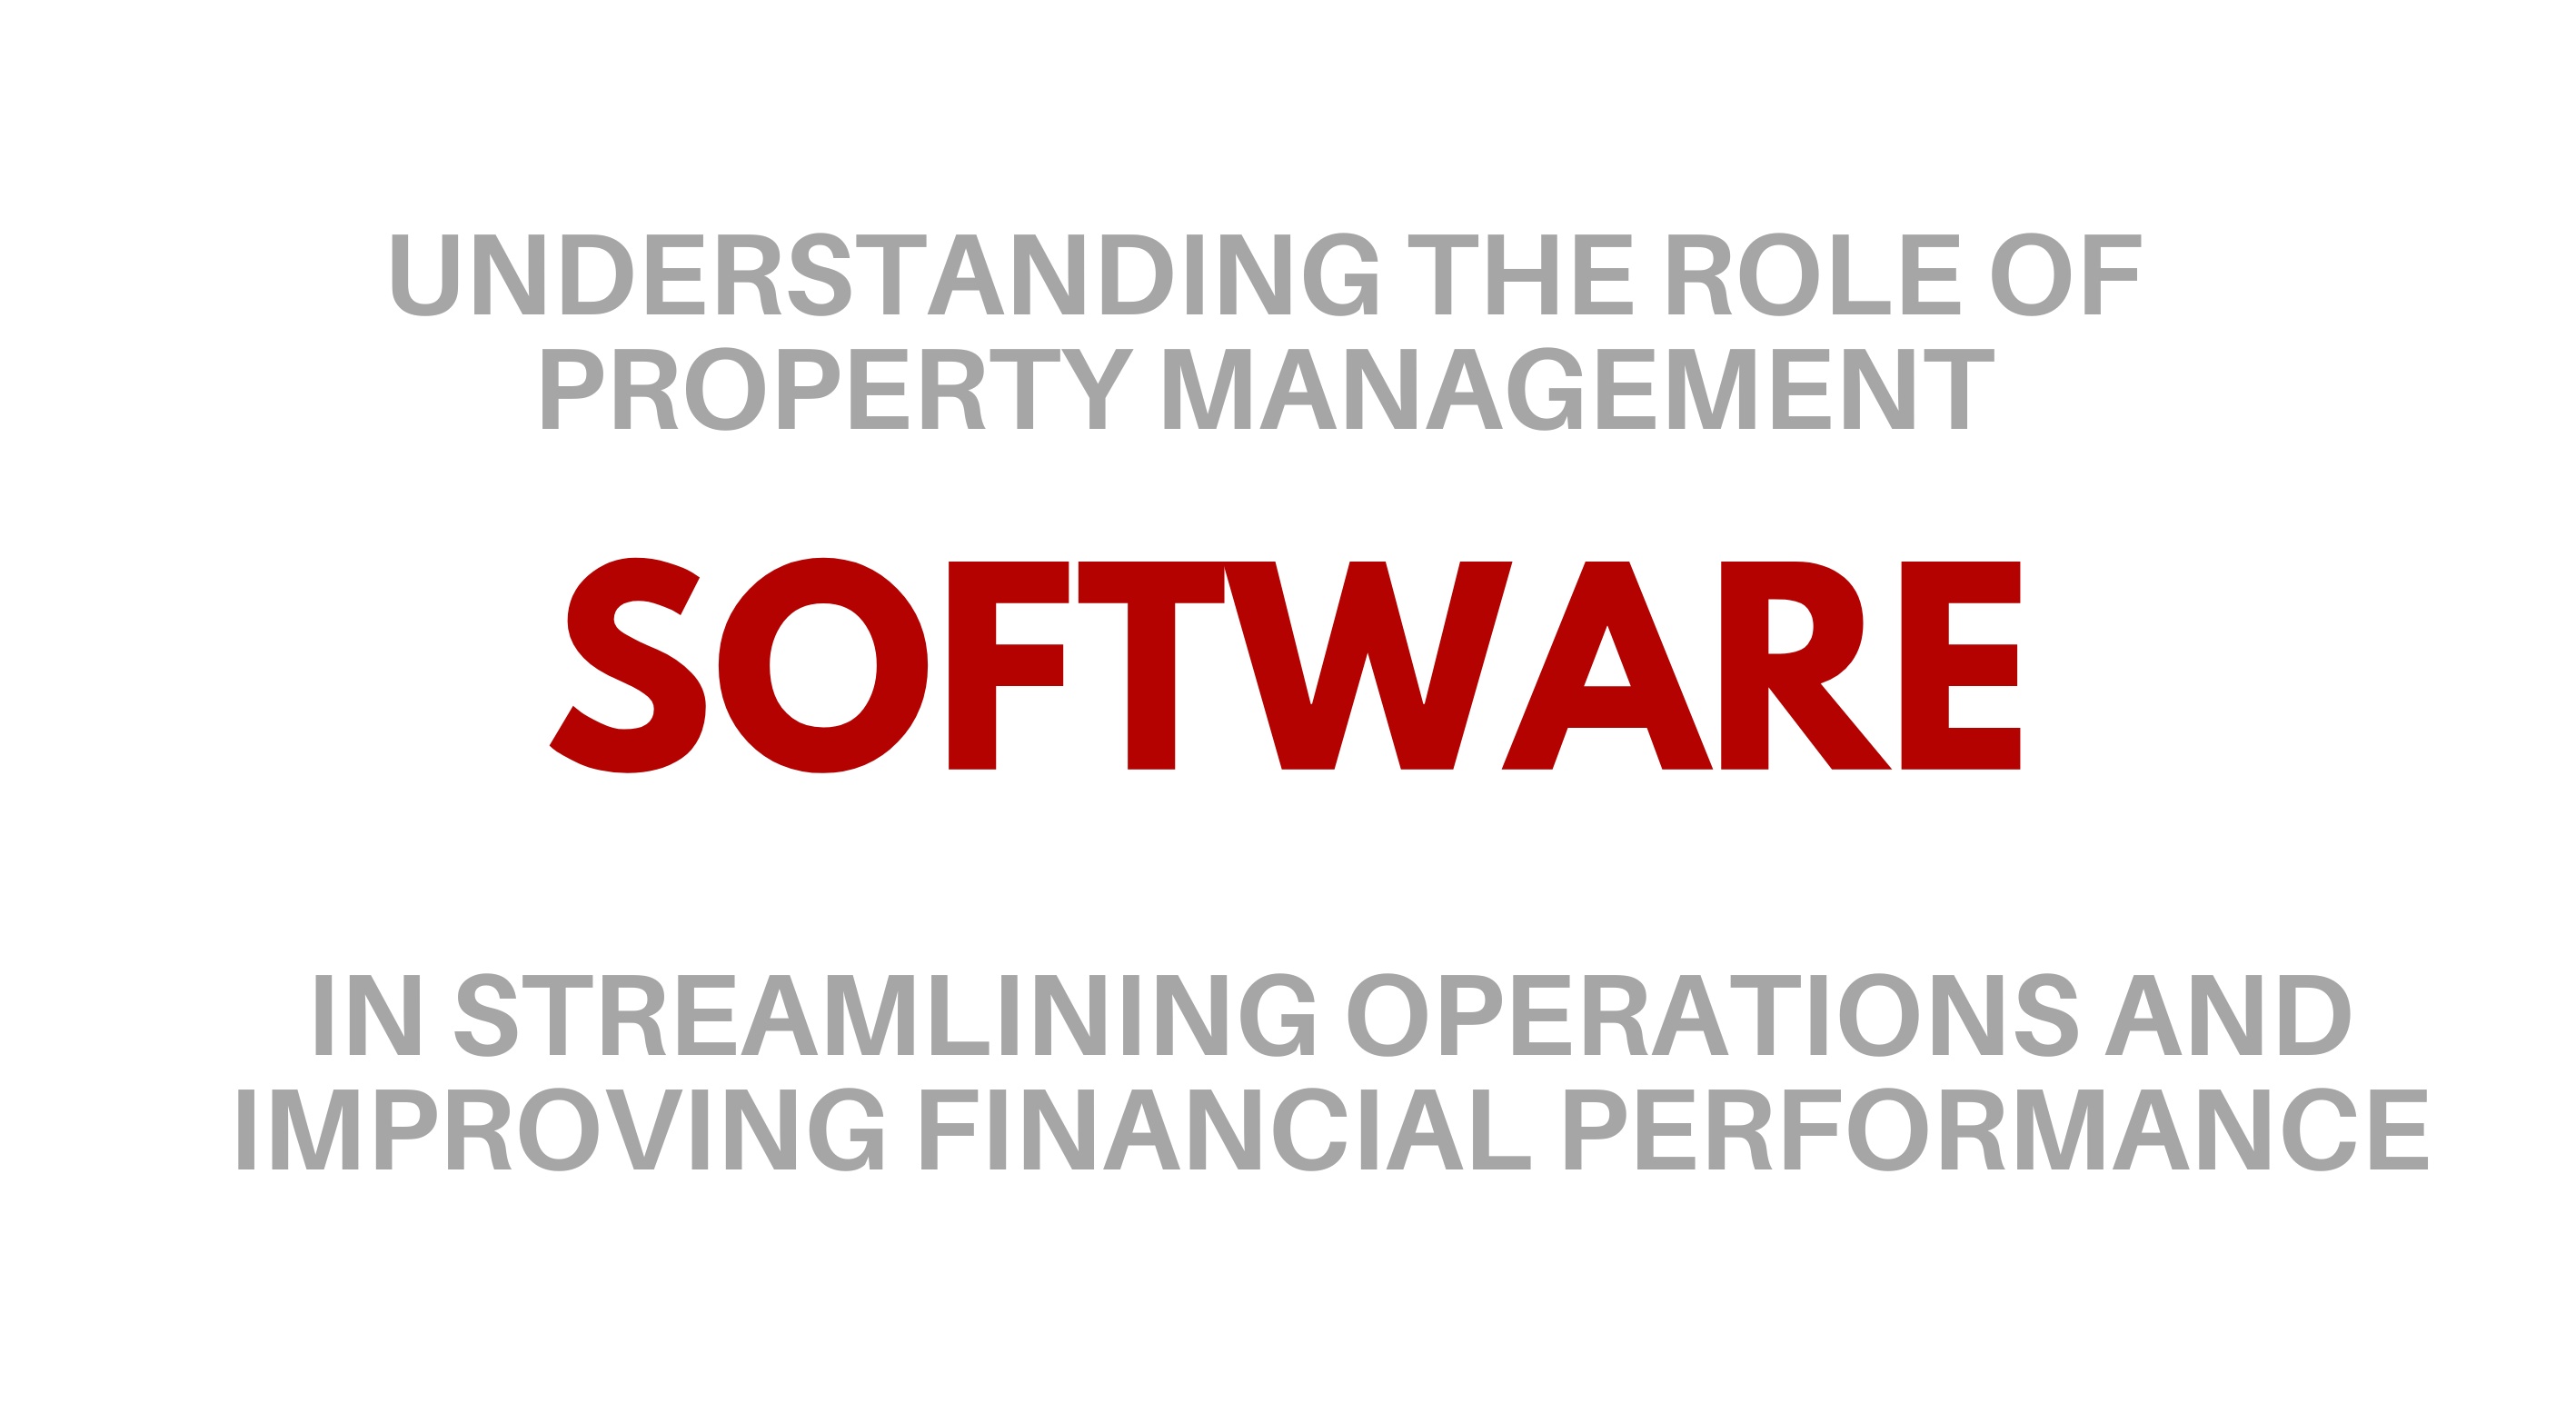 Understanding the role of property management software in streamlining operations and improving financial performance